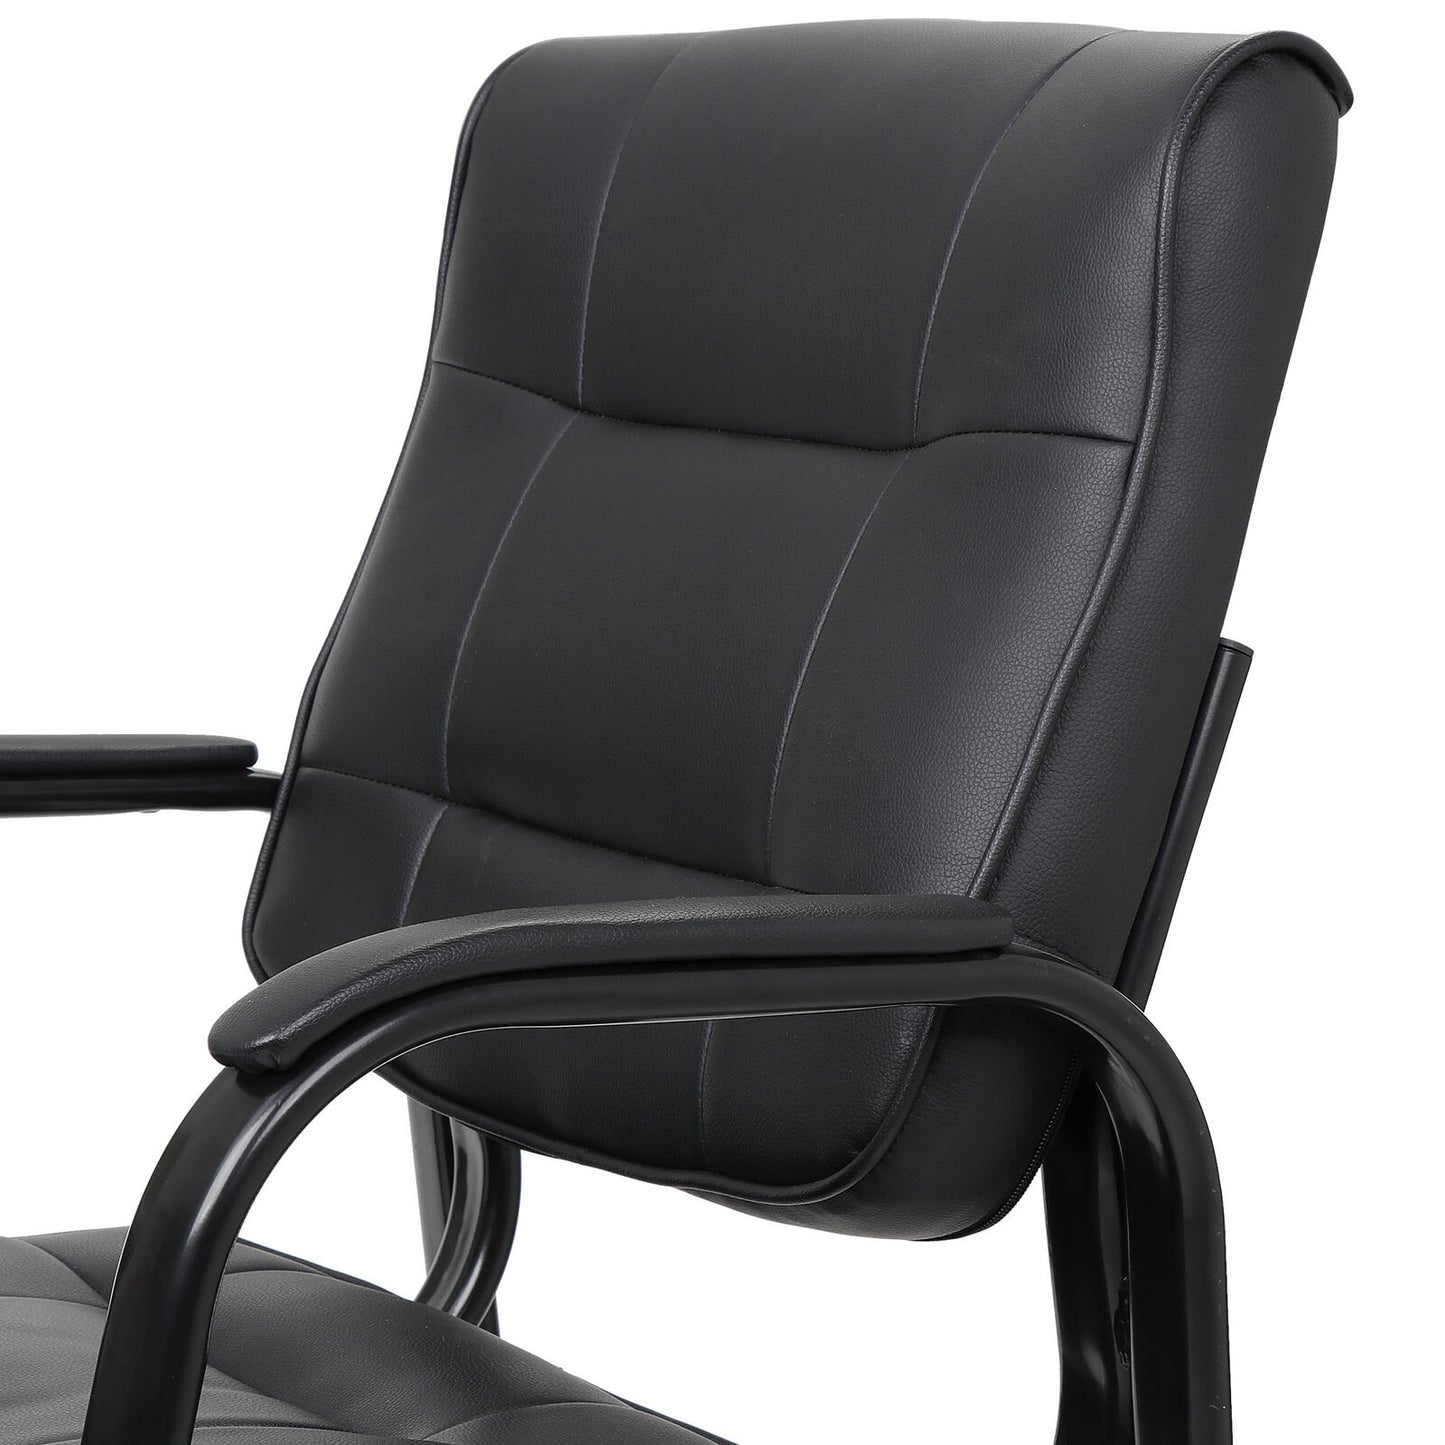 Black Leather Guest Chair Reception Waiting Room Office Desk Side Chairs Classic